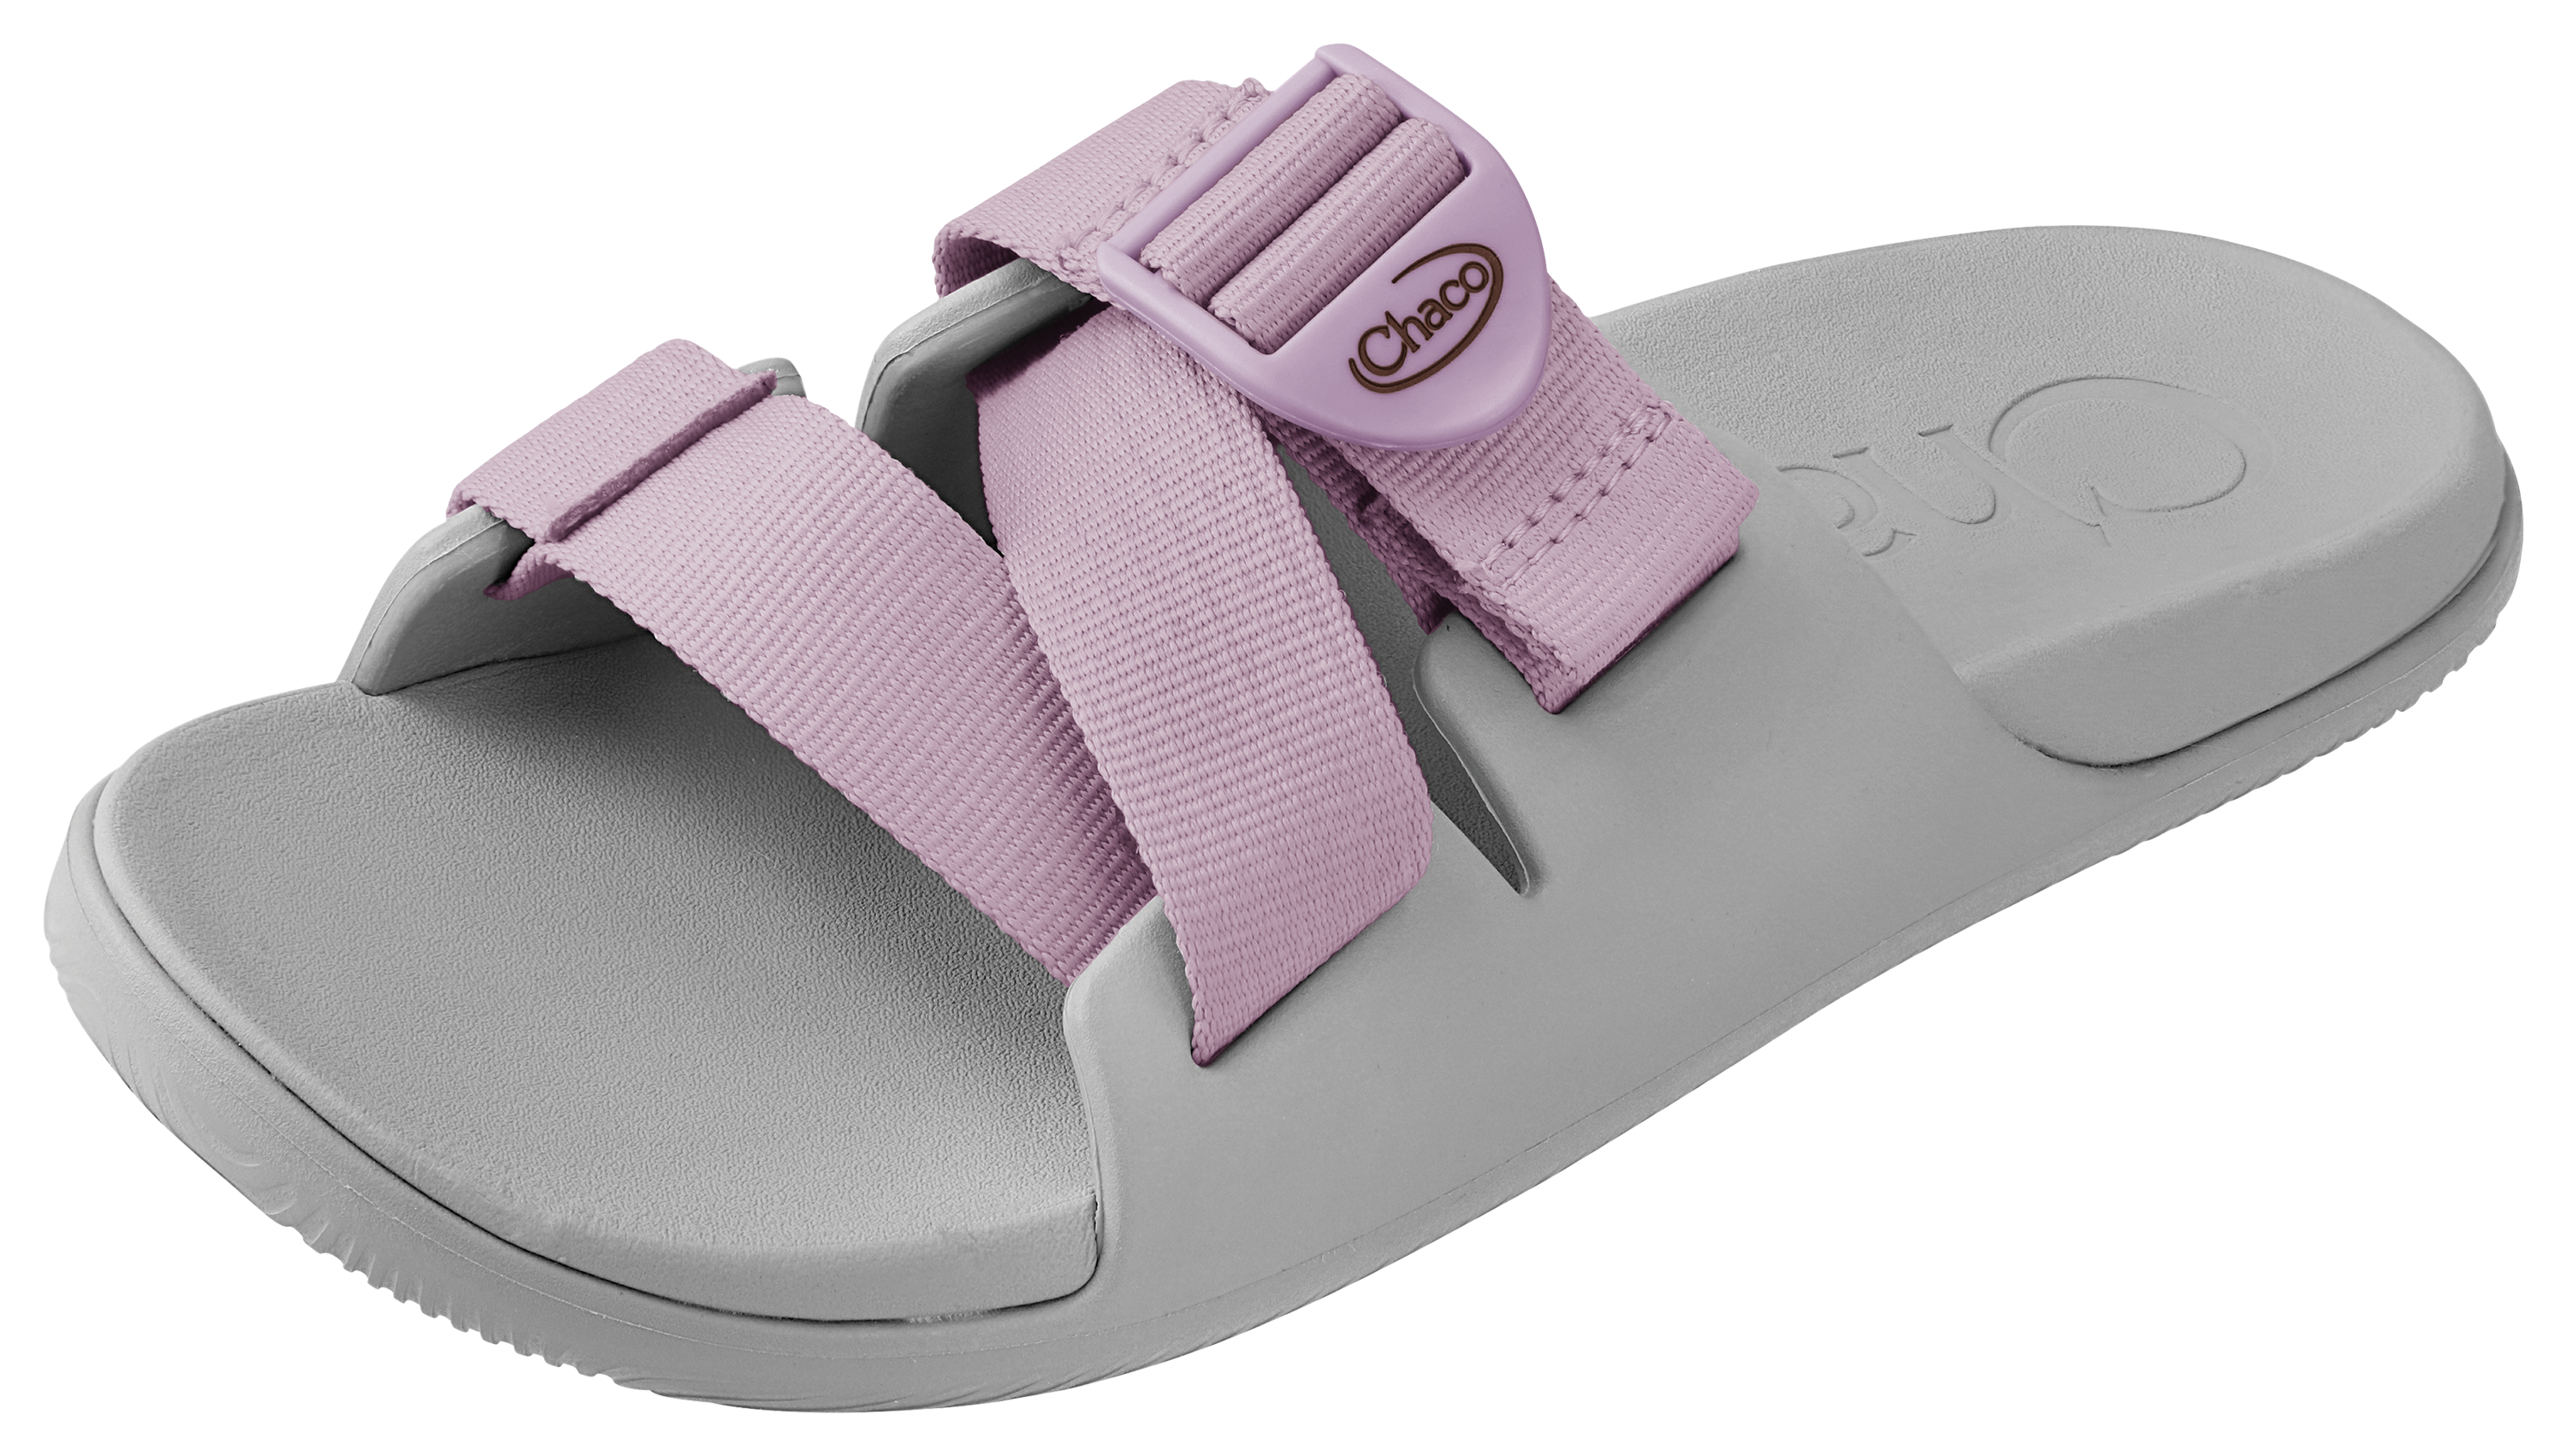 Chaco Chillos Slide Sandals for Ladies Lavender 9M